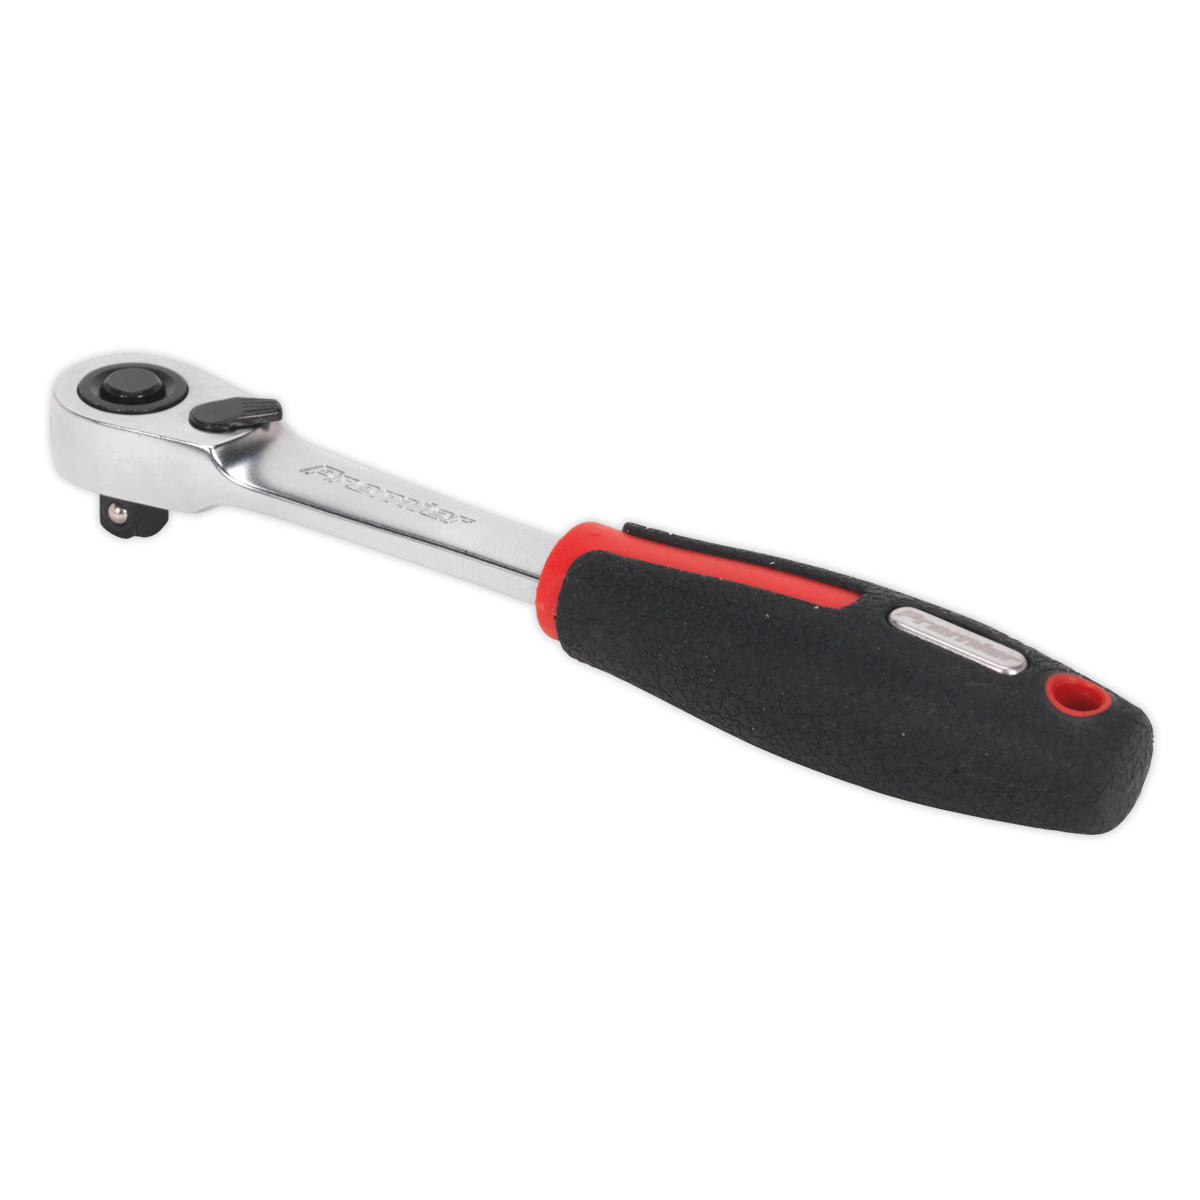 Sealey 1/4"Sq Drive 72-Tooth Ratchet Wrench Flip Reverse - Platinum Series AK8980